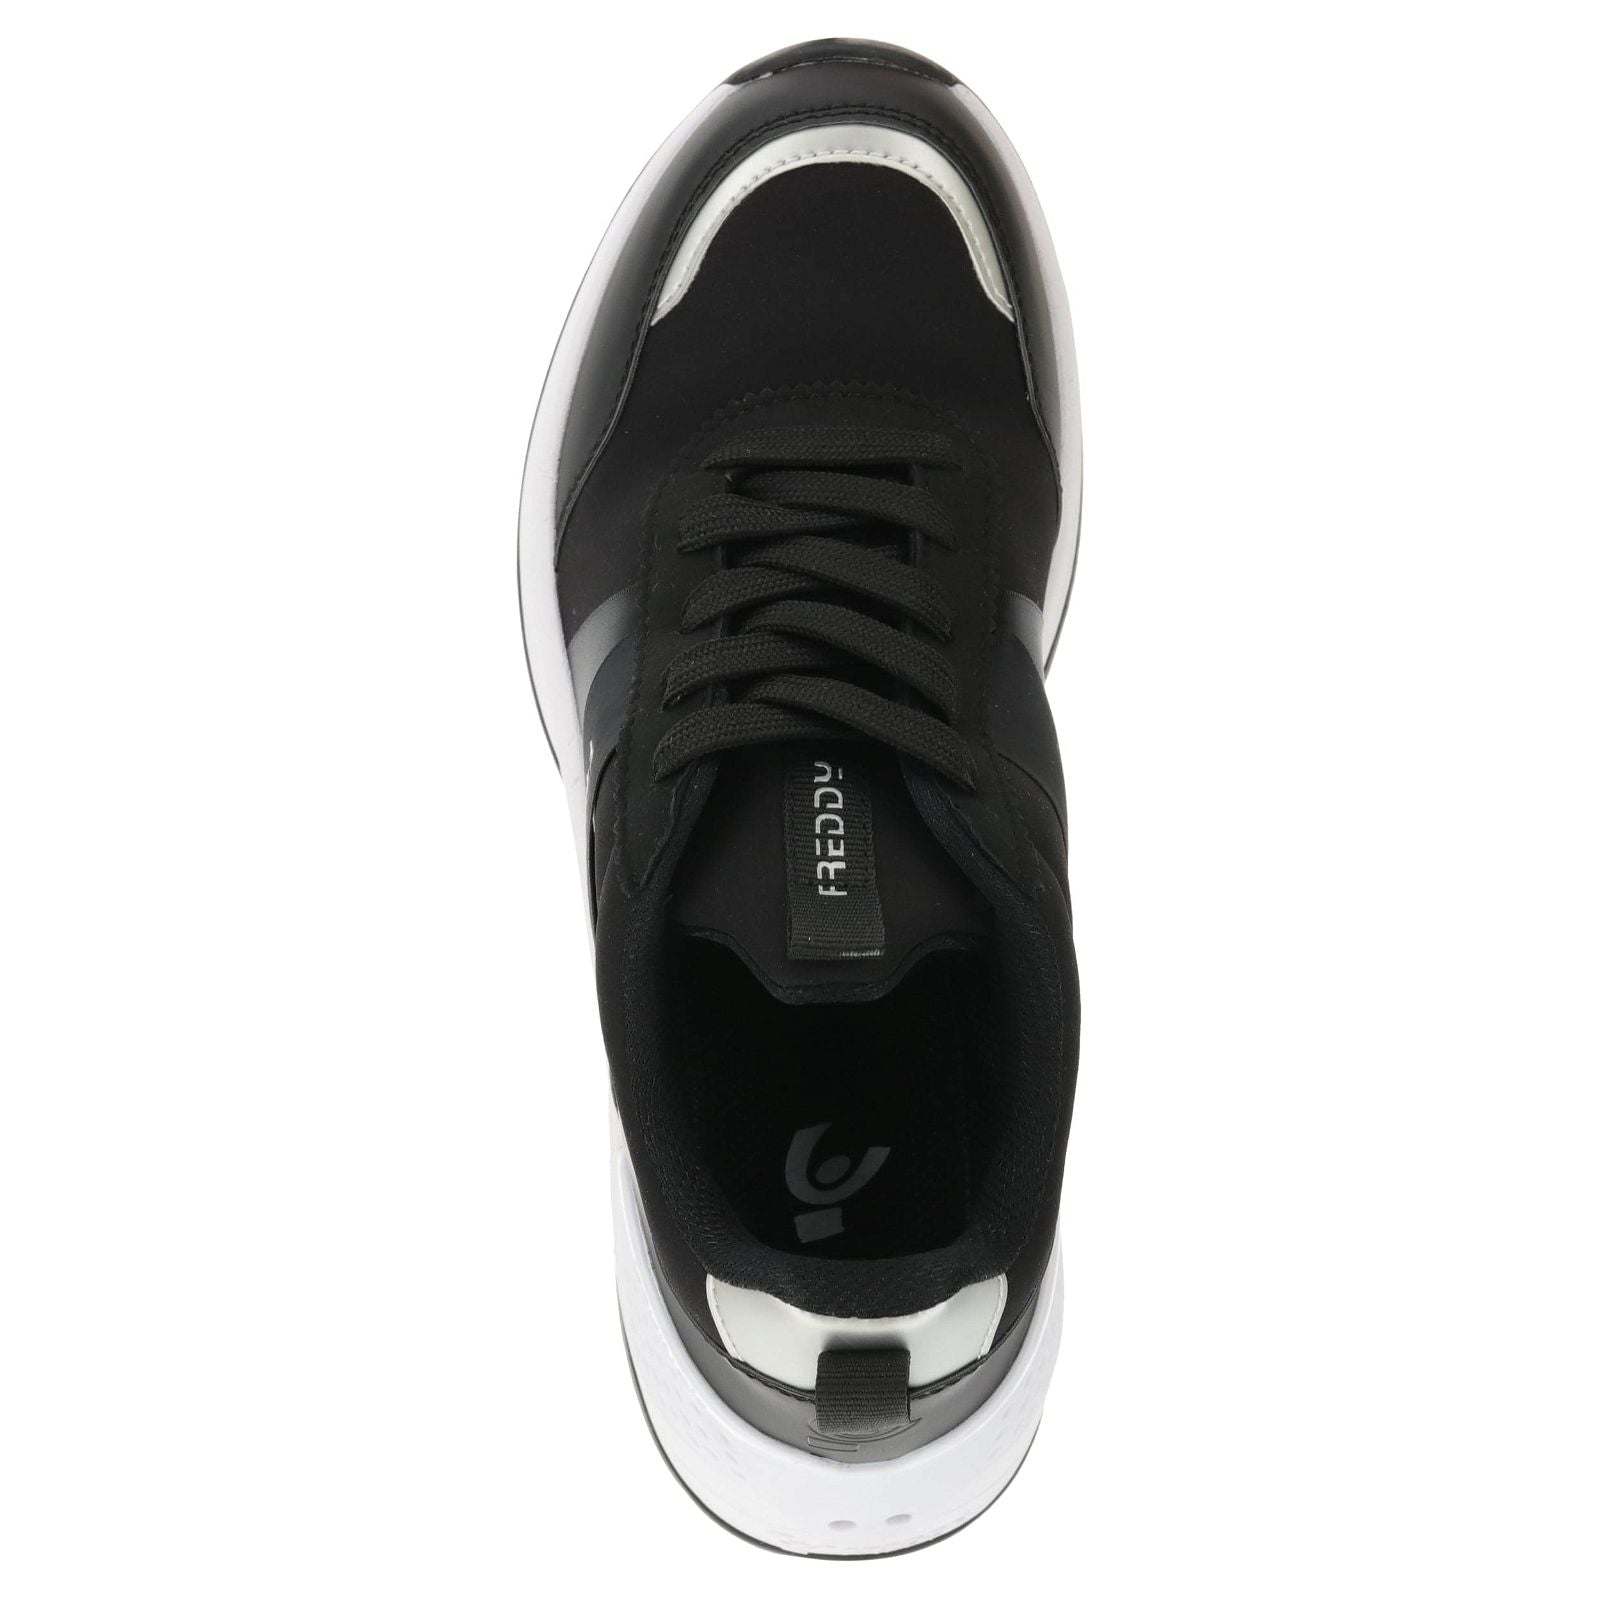 Women's Sneakers with Skinair® Technology - Black 3